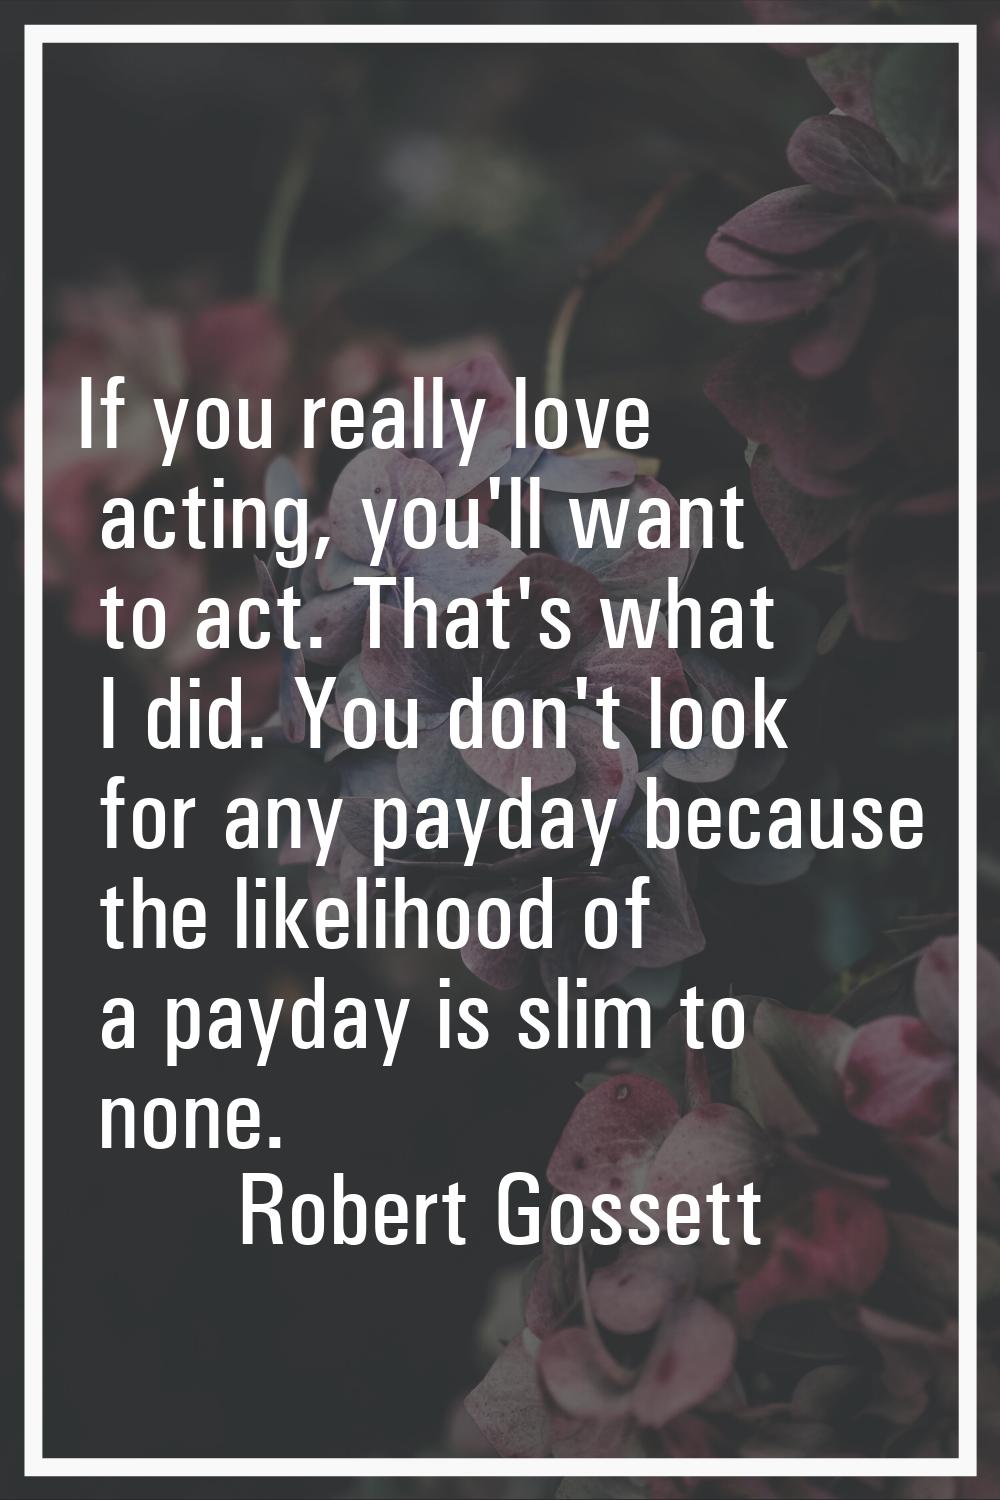 If you really love acting, you'll want to act. That's what I did. You don't look for any payday bec